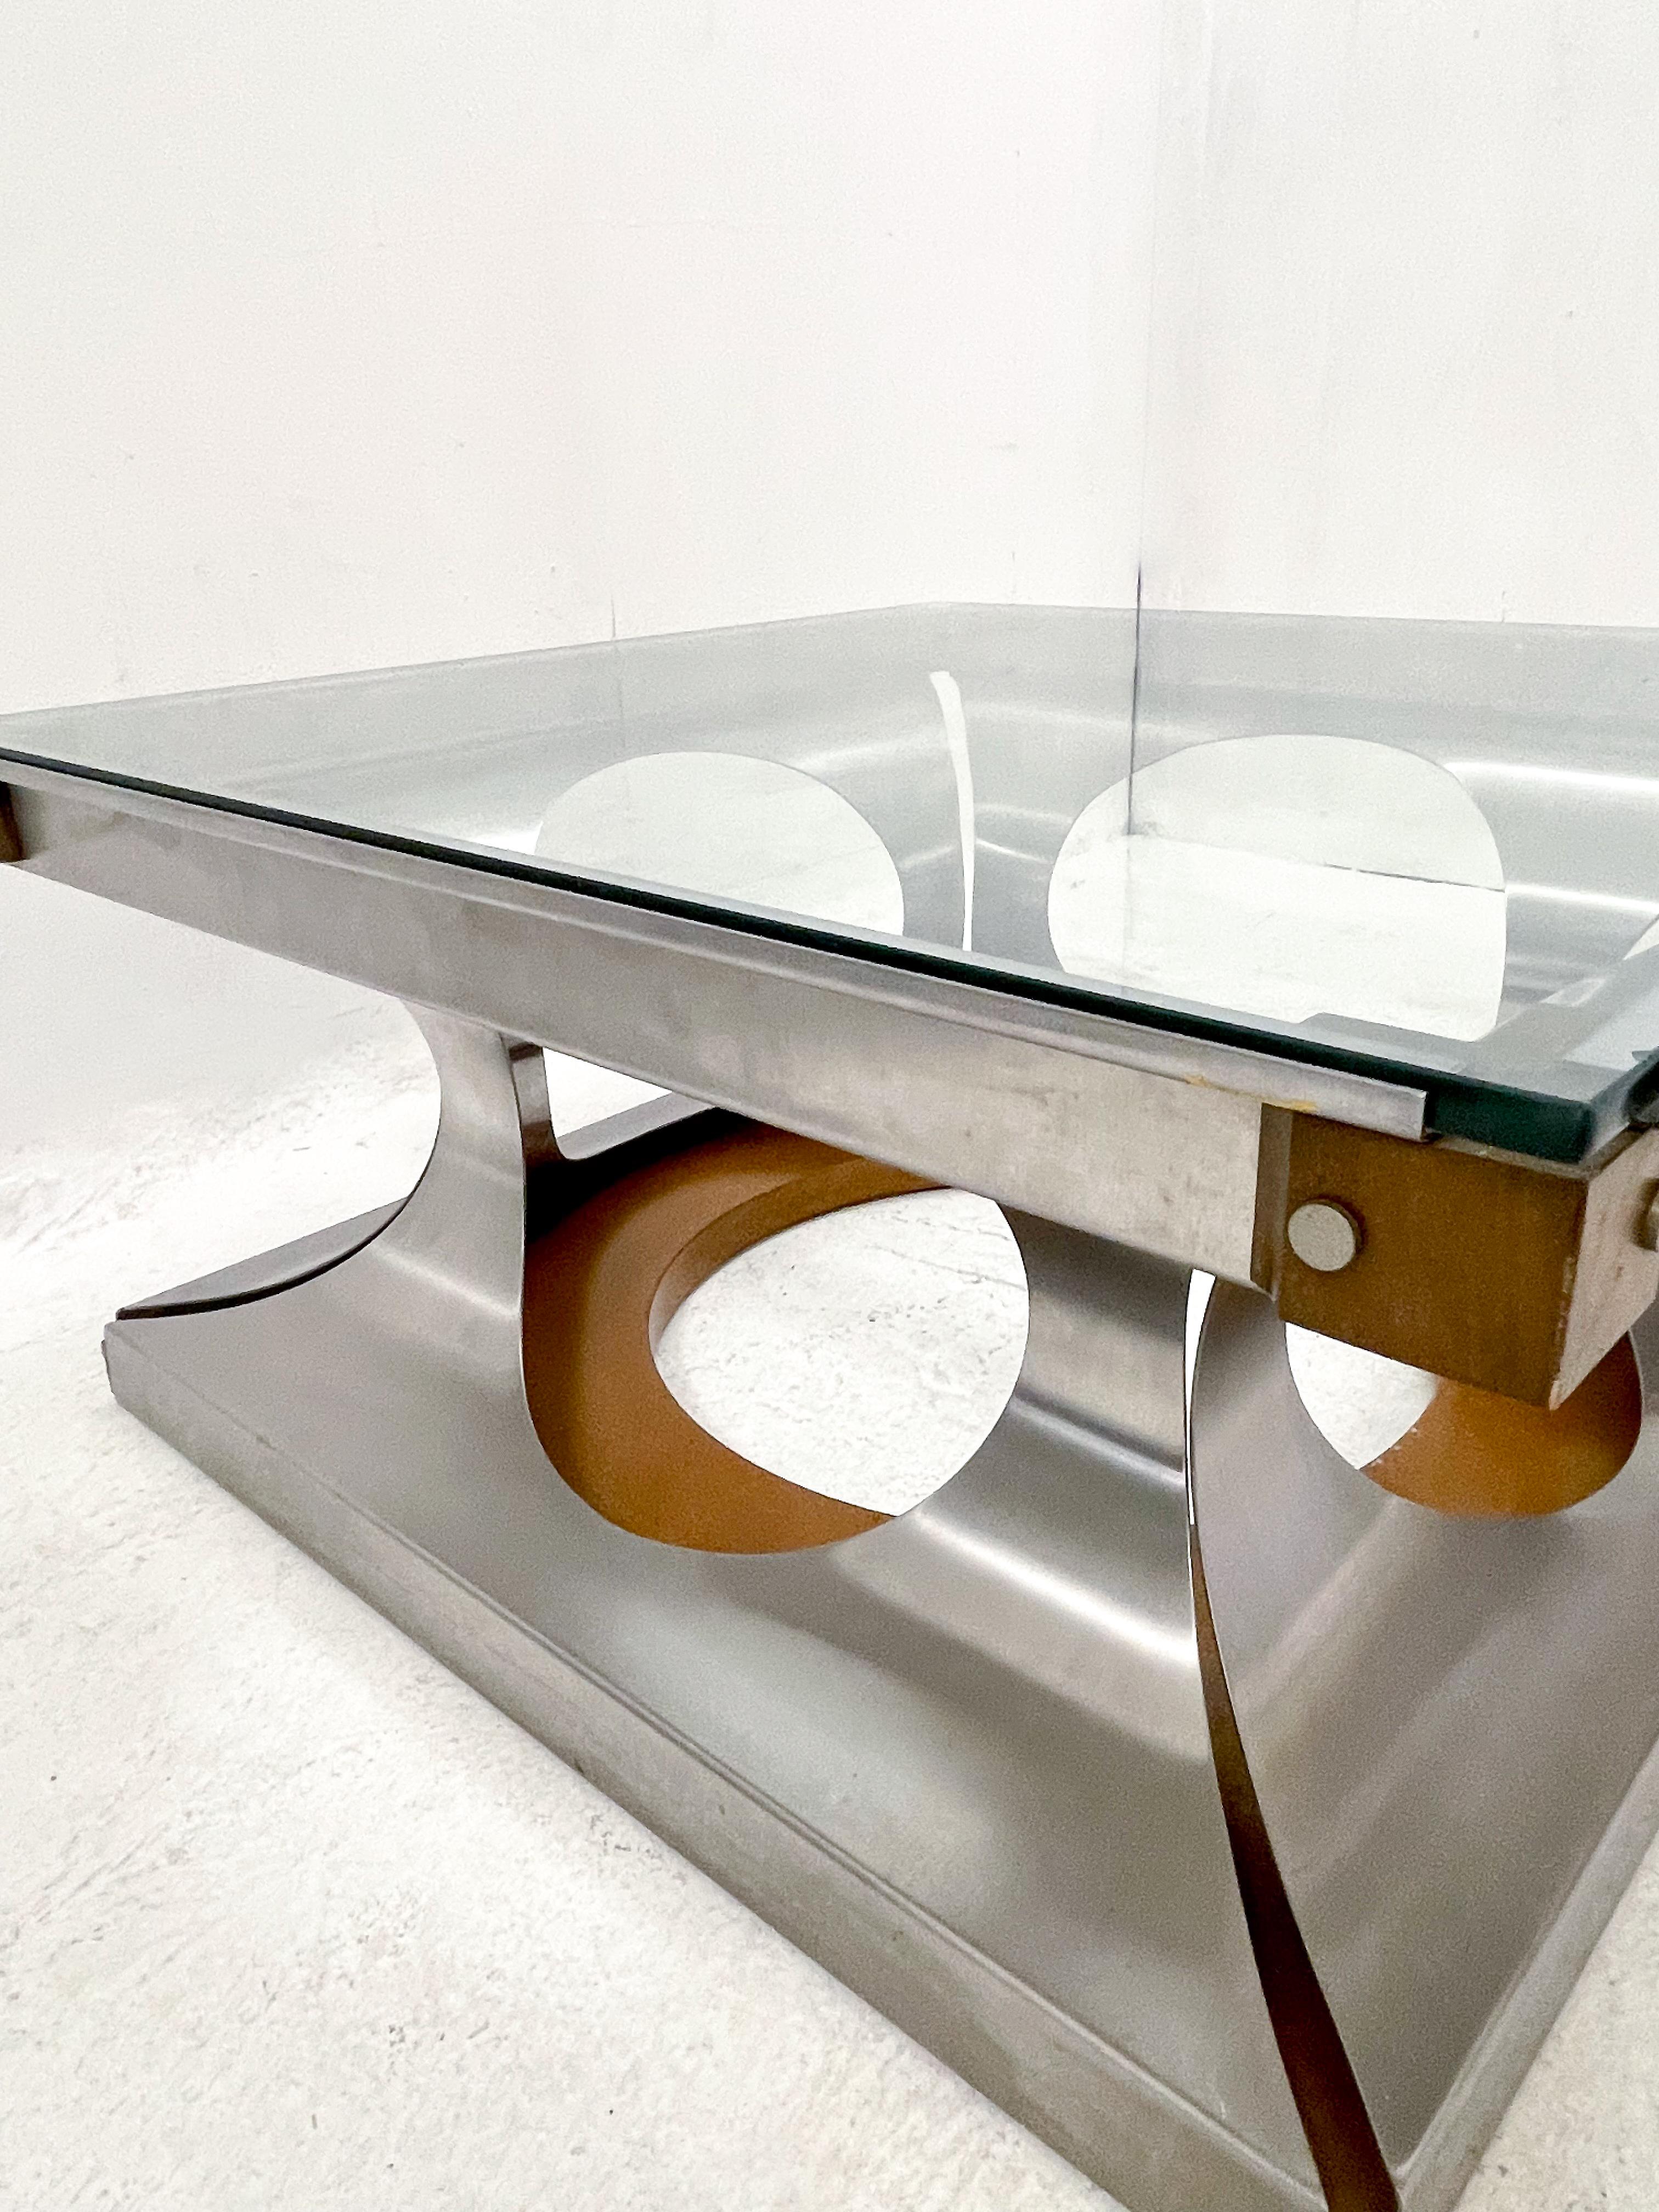 Italian coffee table, glass and steel and wood, 1970s.